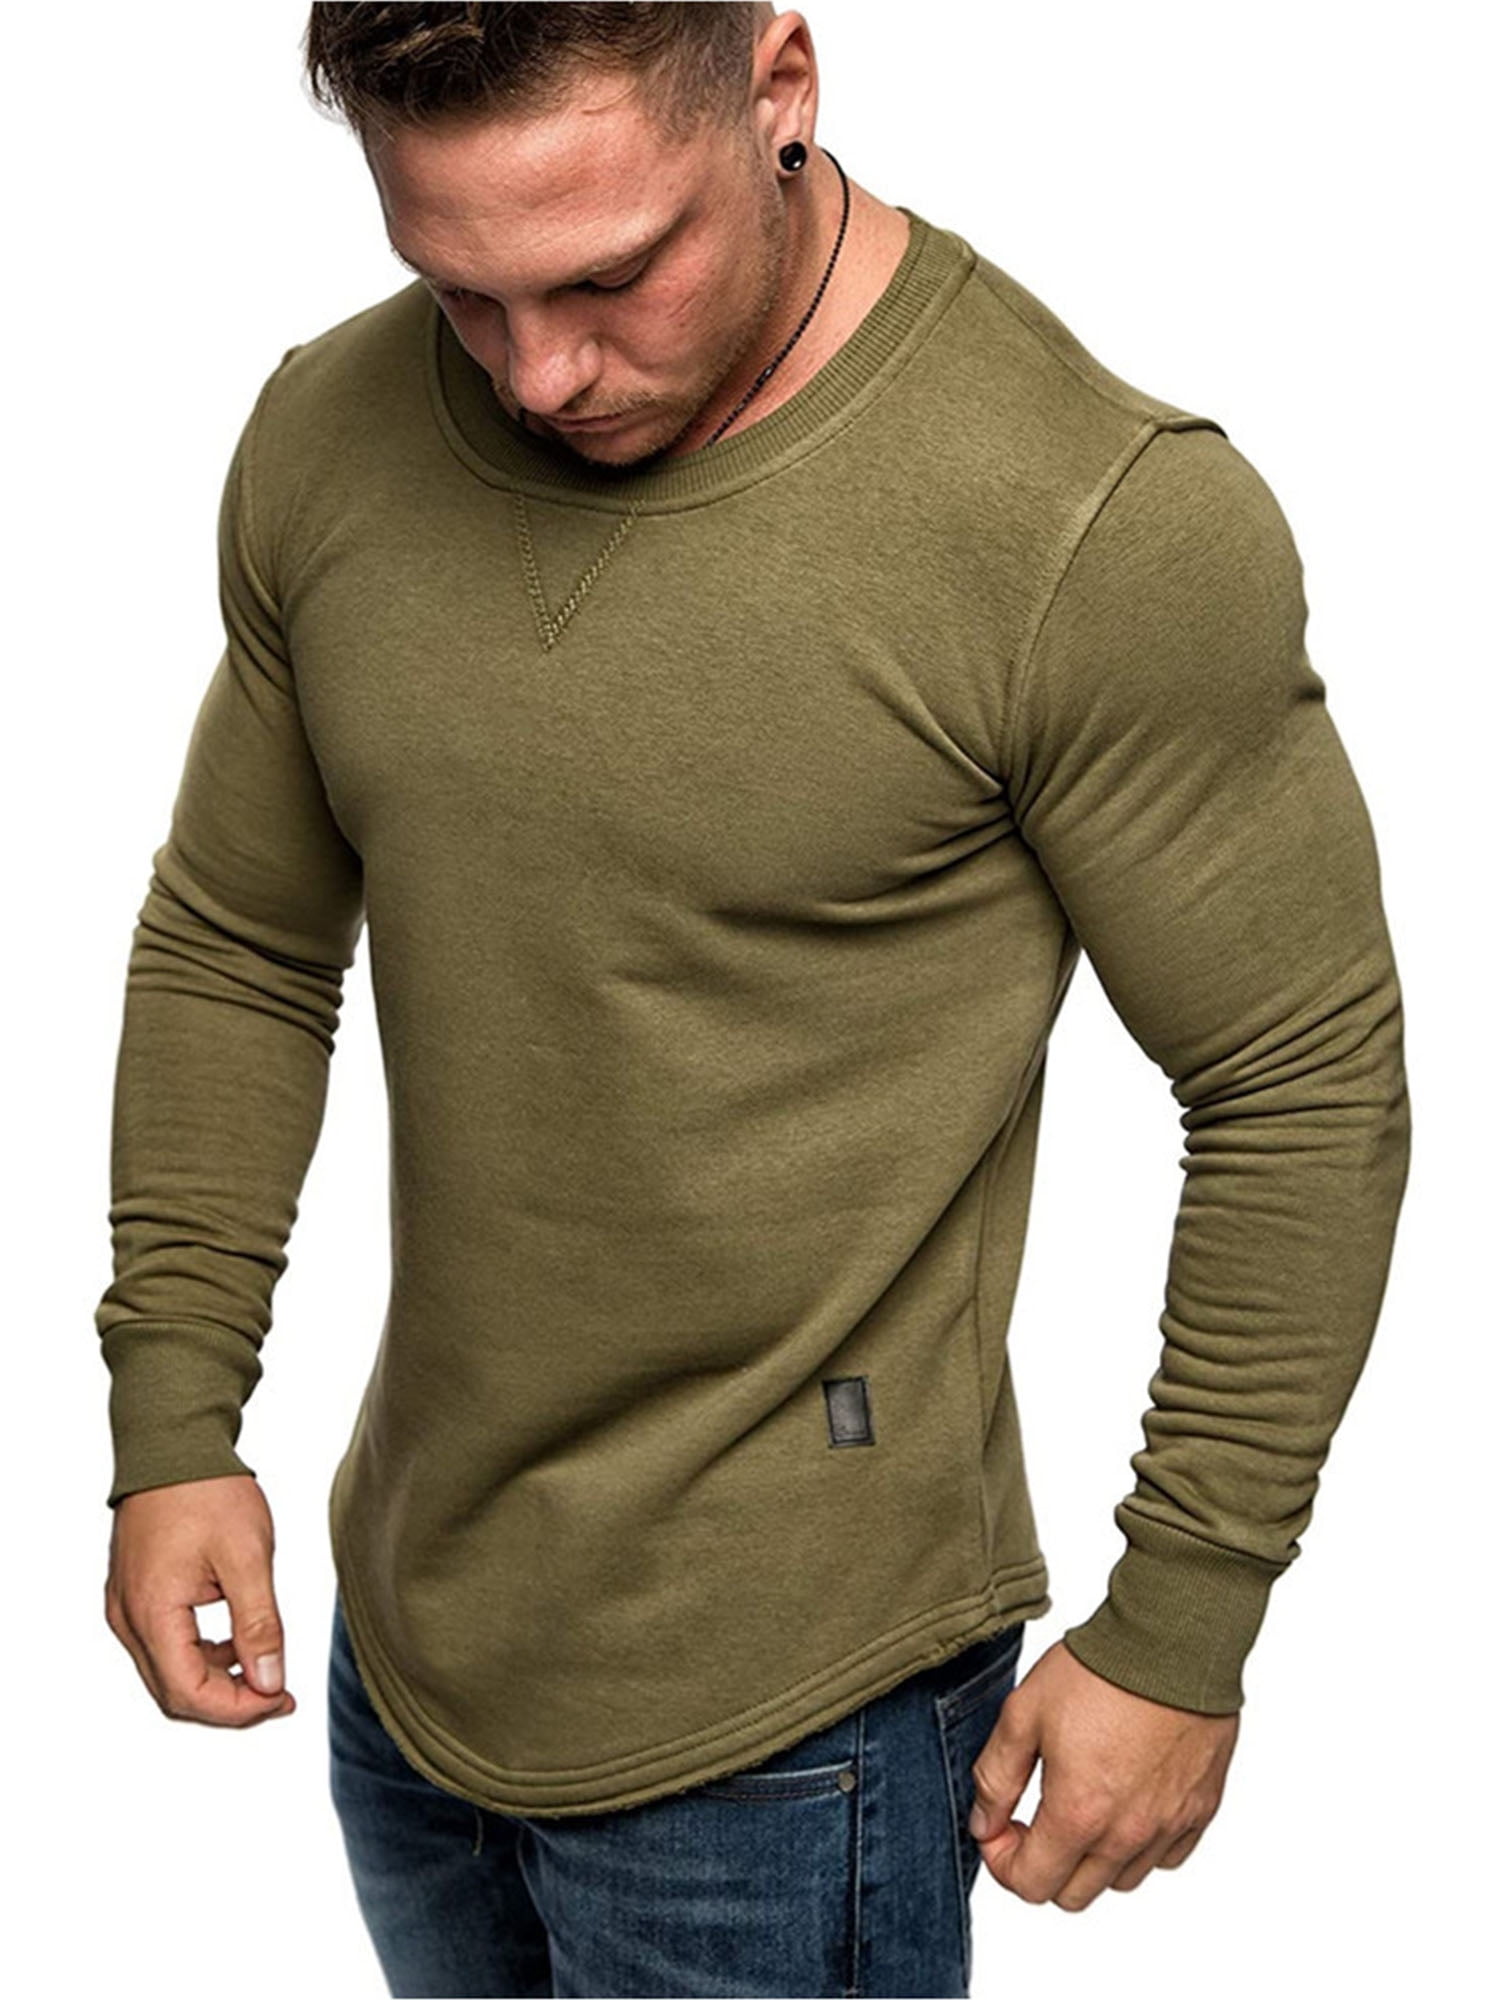 Athletic Works Mens and Men's Active Performance Long Sleeve Crew Neck ...